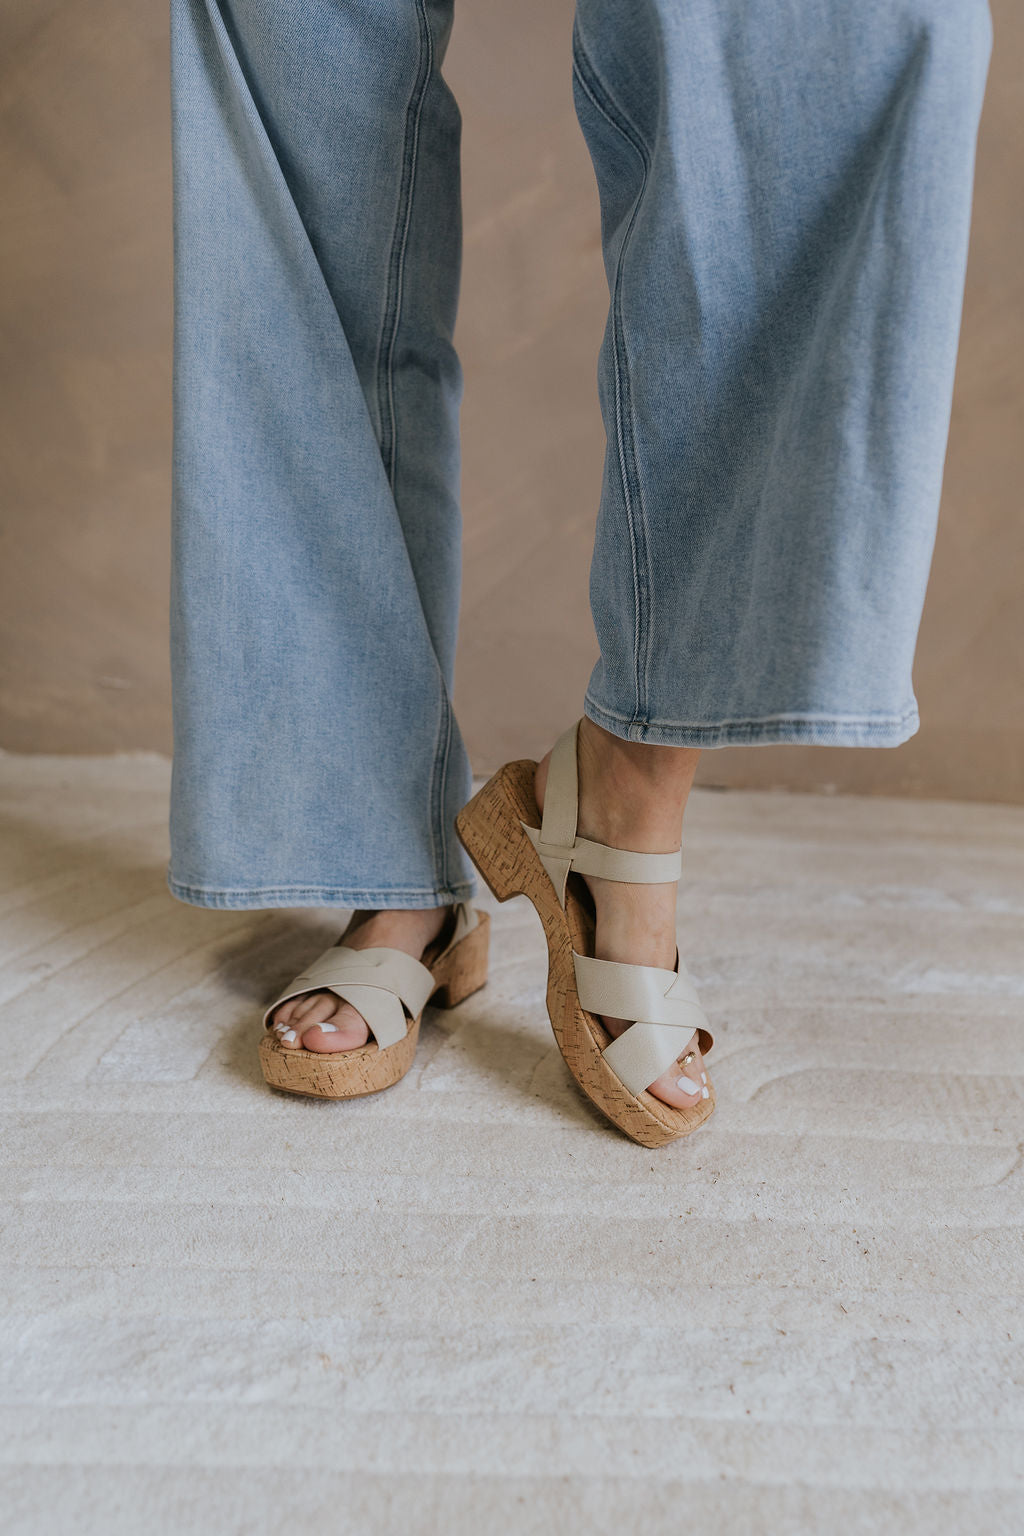 Front view of female model wearing the Dasha Sandal in Off White which features off white upper leather fabric, kork platform sole, block heel, criss-cross strap and gold adjustable buckle closure